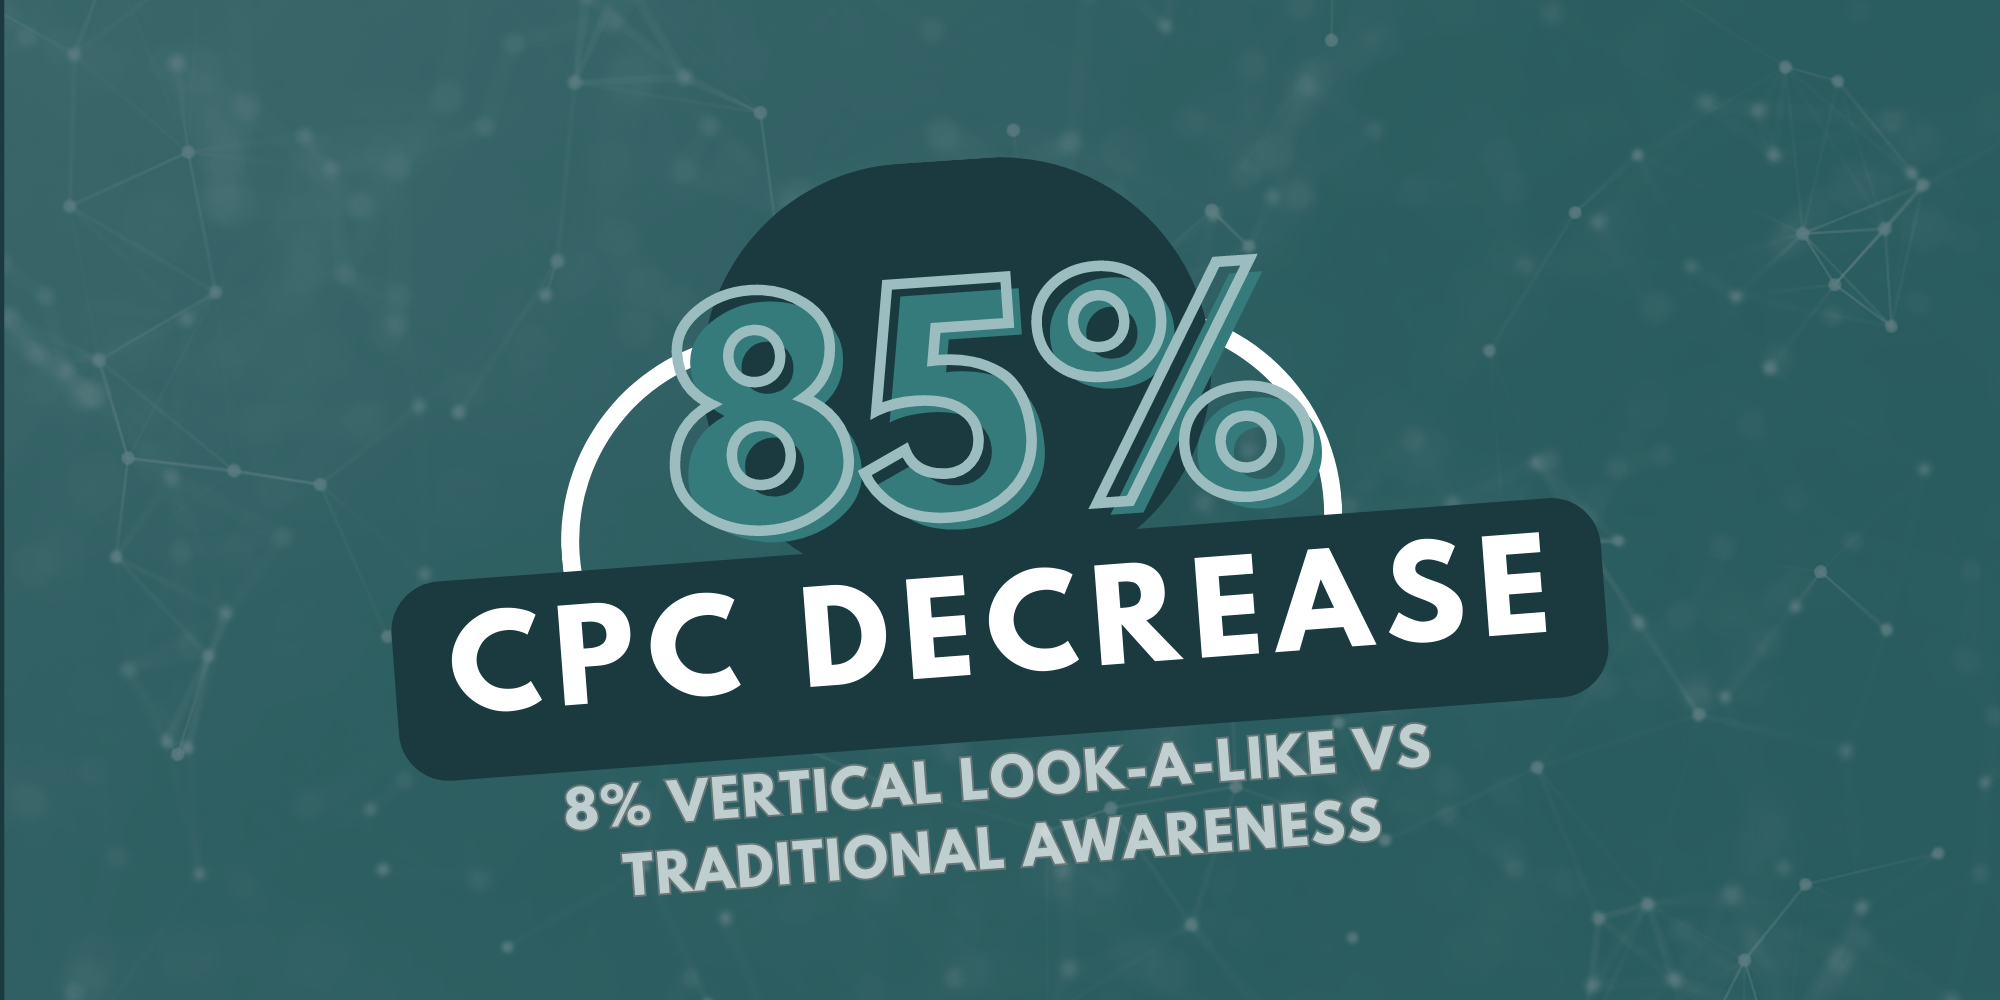 85% cpc decrease between traditional targeting campaigns and propensity list campaigns